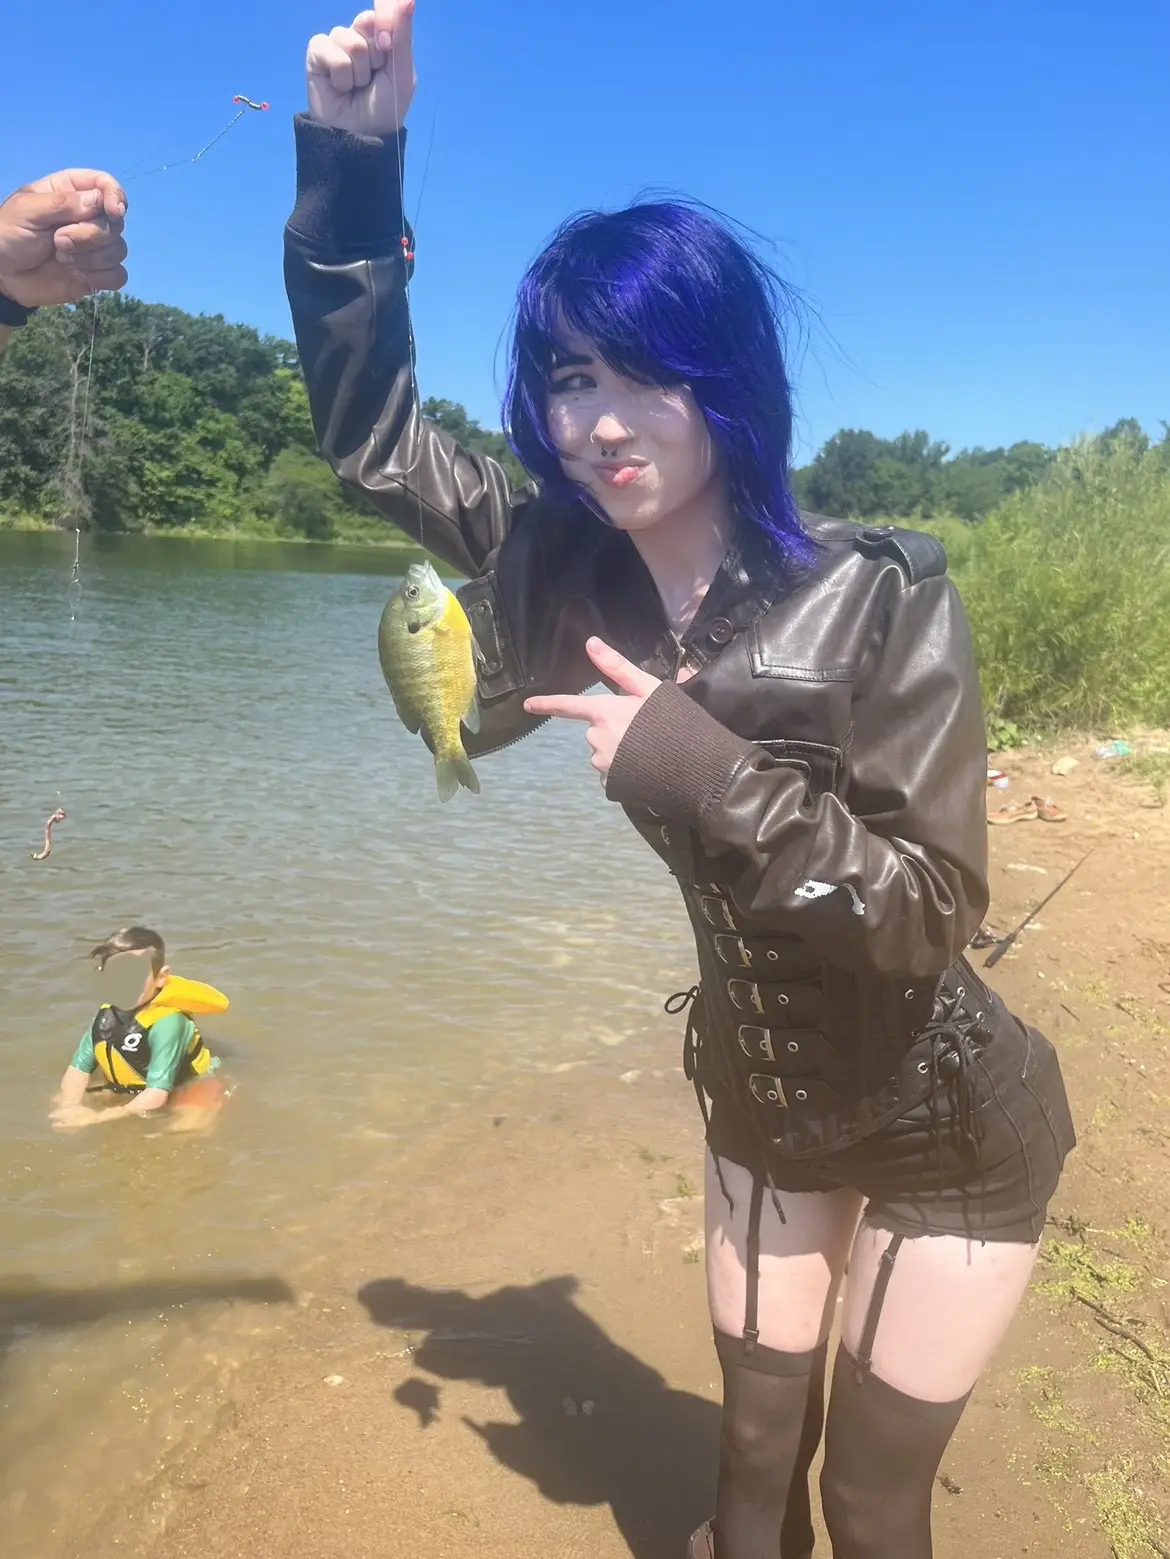 First time fishing and I caught my first fish!!! FISHING IS SO FUN OMG I CANNOT WAIT TO GO AGAIN